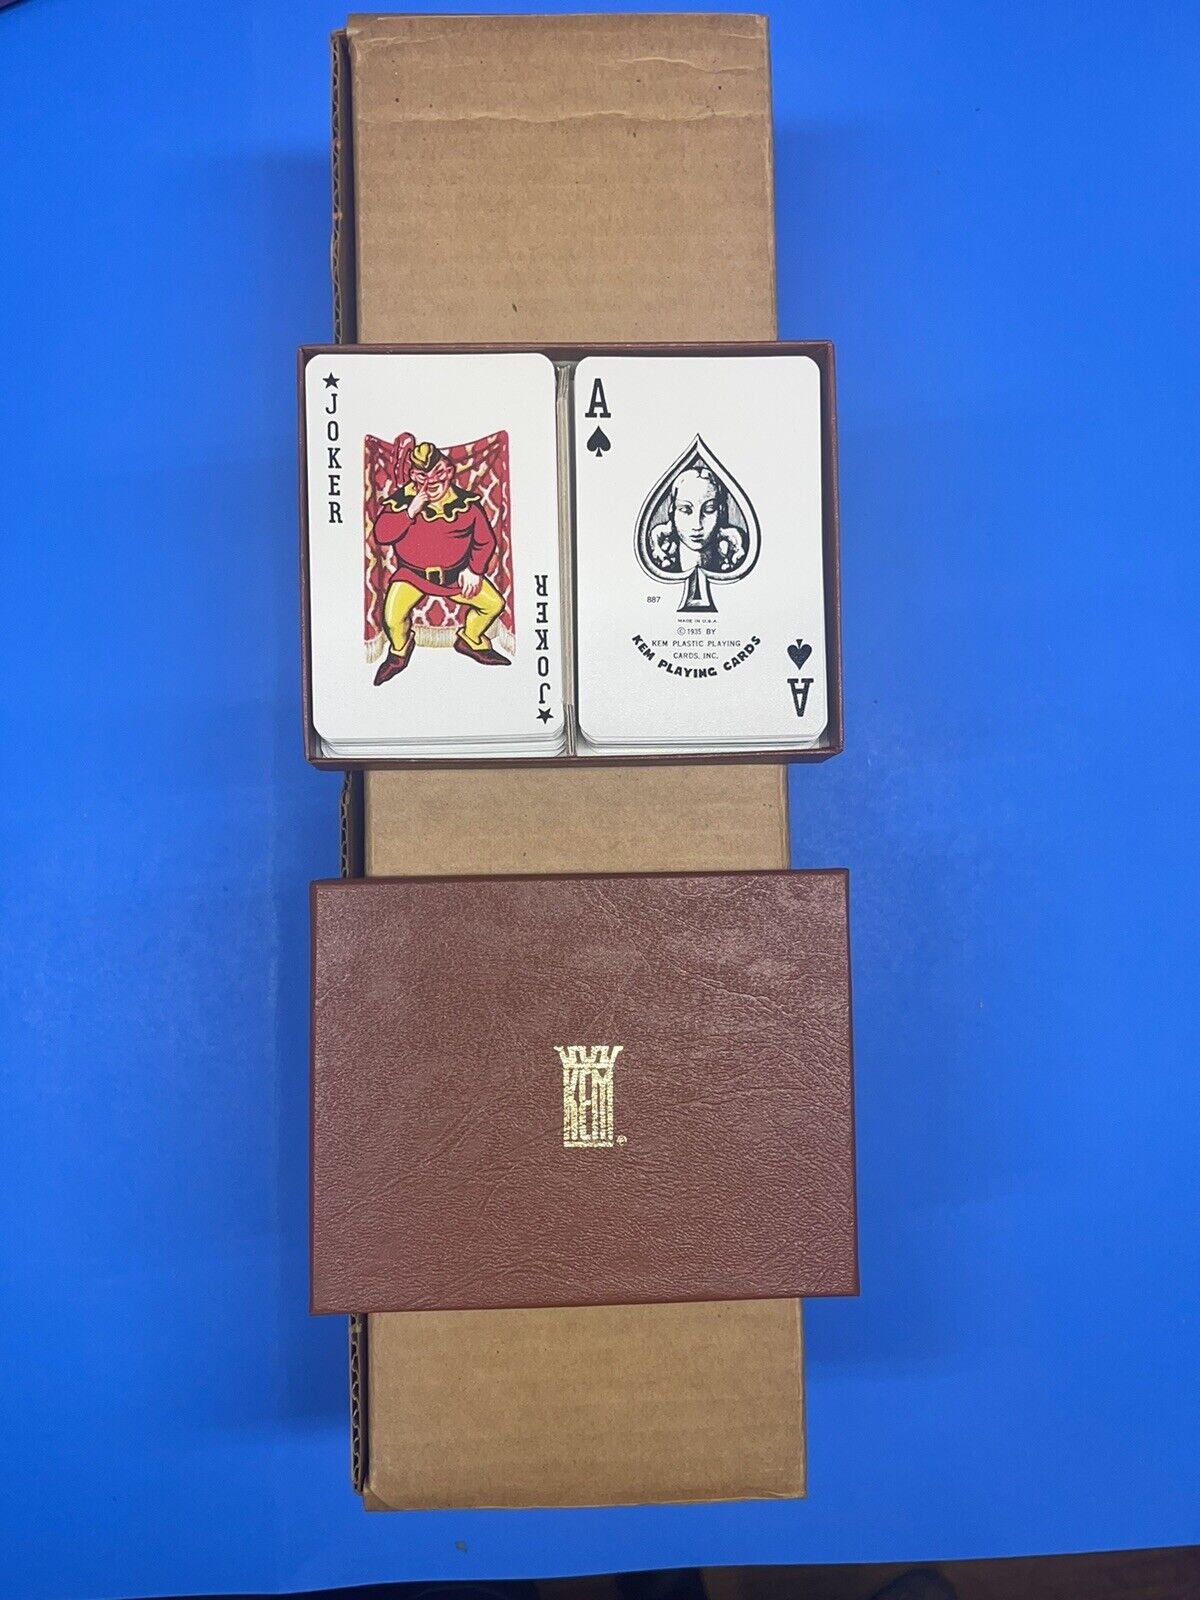 Vintage KEM Style Double Deck Playing Cards, 53 Cards Deck, Green & Browne W/Box